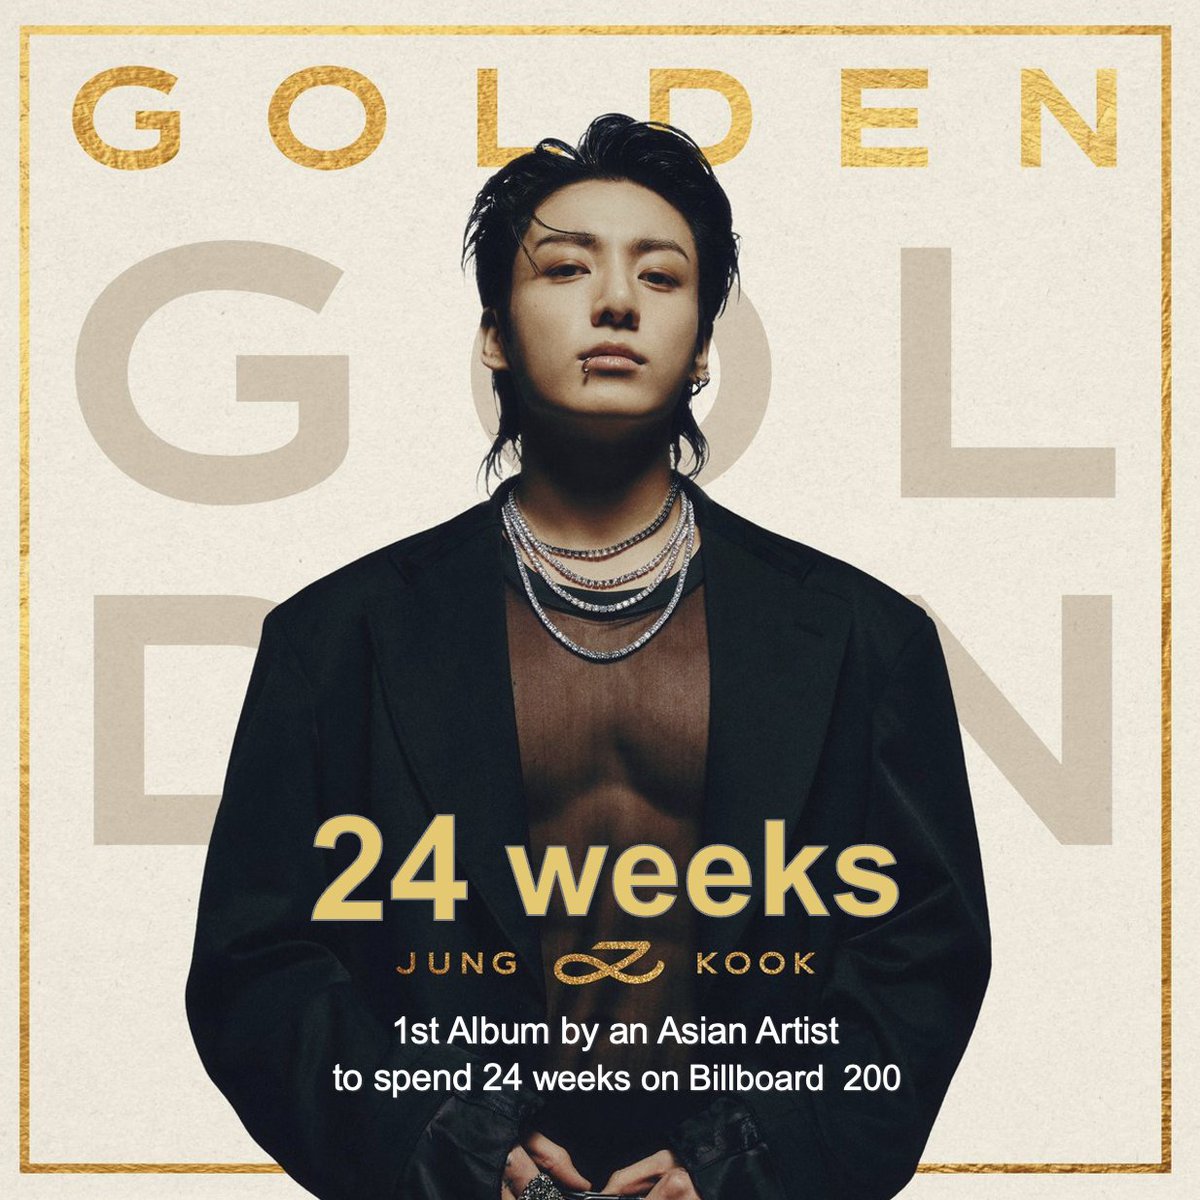 #Jungkook's 'GOLDEN' has spent 24 weeks on the Billboard 200, at #199 this week! It's the 1st and only album by an Asian Soloist to reach this Milestone in history! 💪🥇🌏👨‍🎤📀📈2⃣4⃣📆🇺🇸2⃣0⃣0⃣🔥🐐👑🖤💜